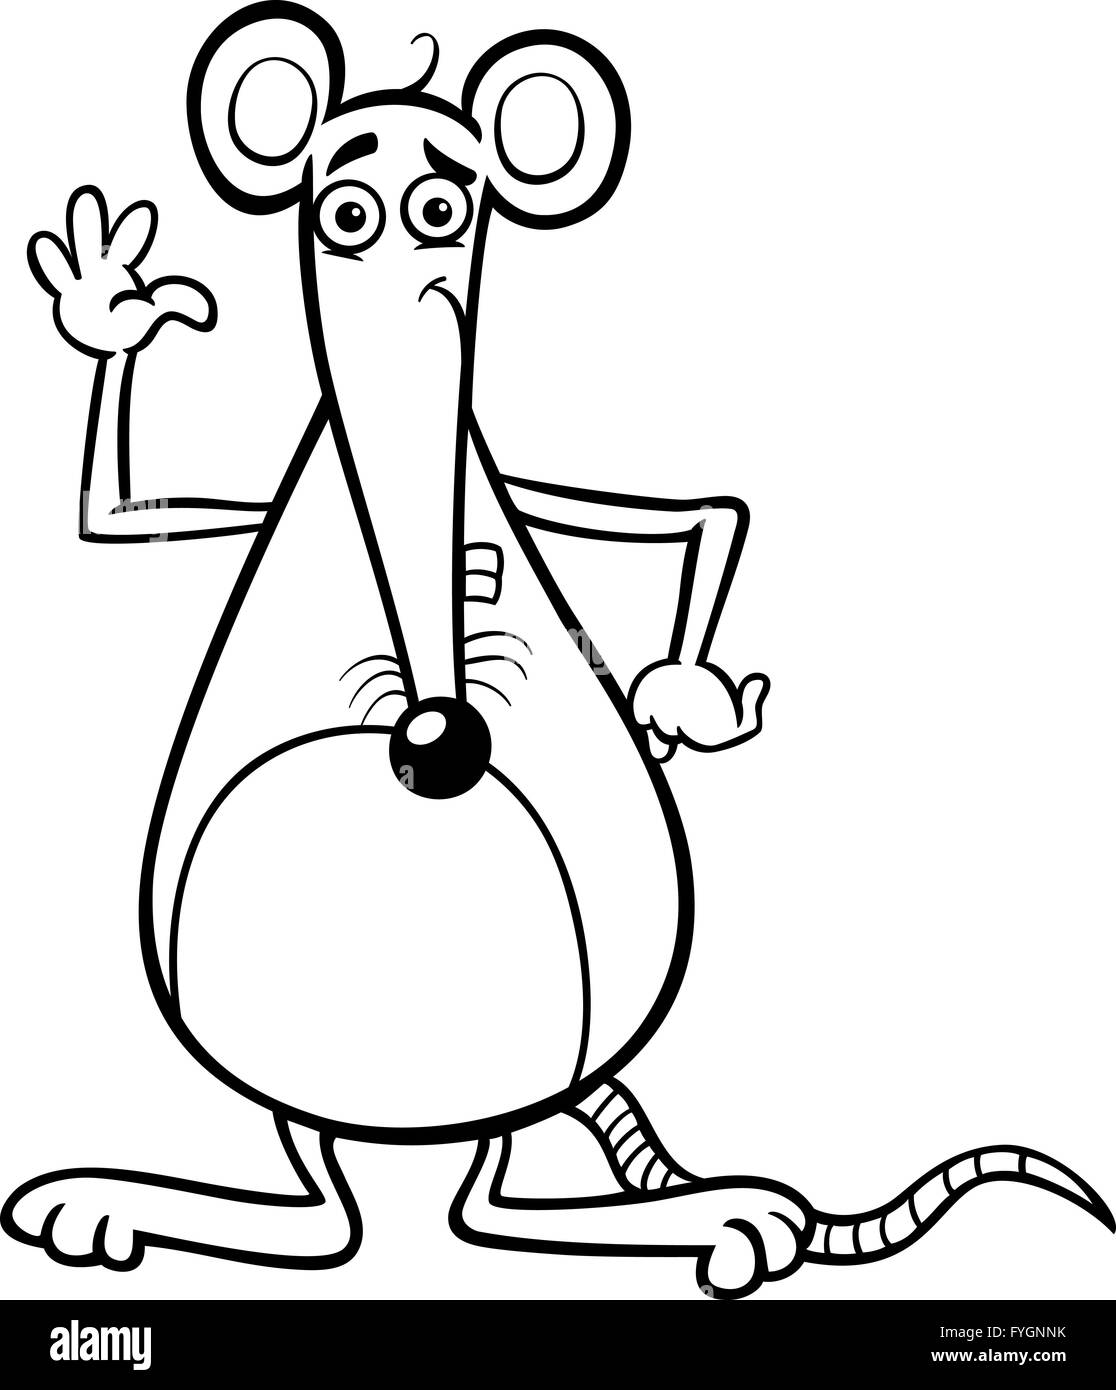 mouse cartoon for coloring book Stock Photo